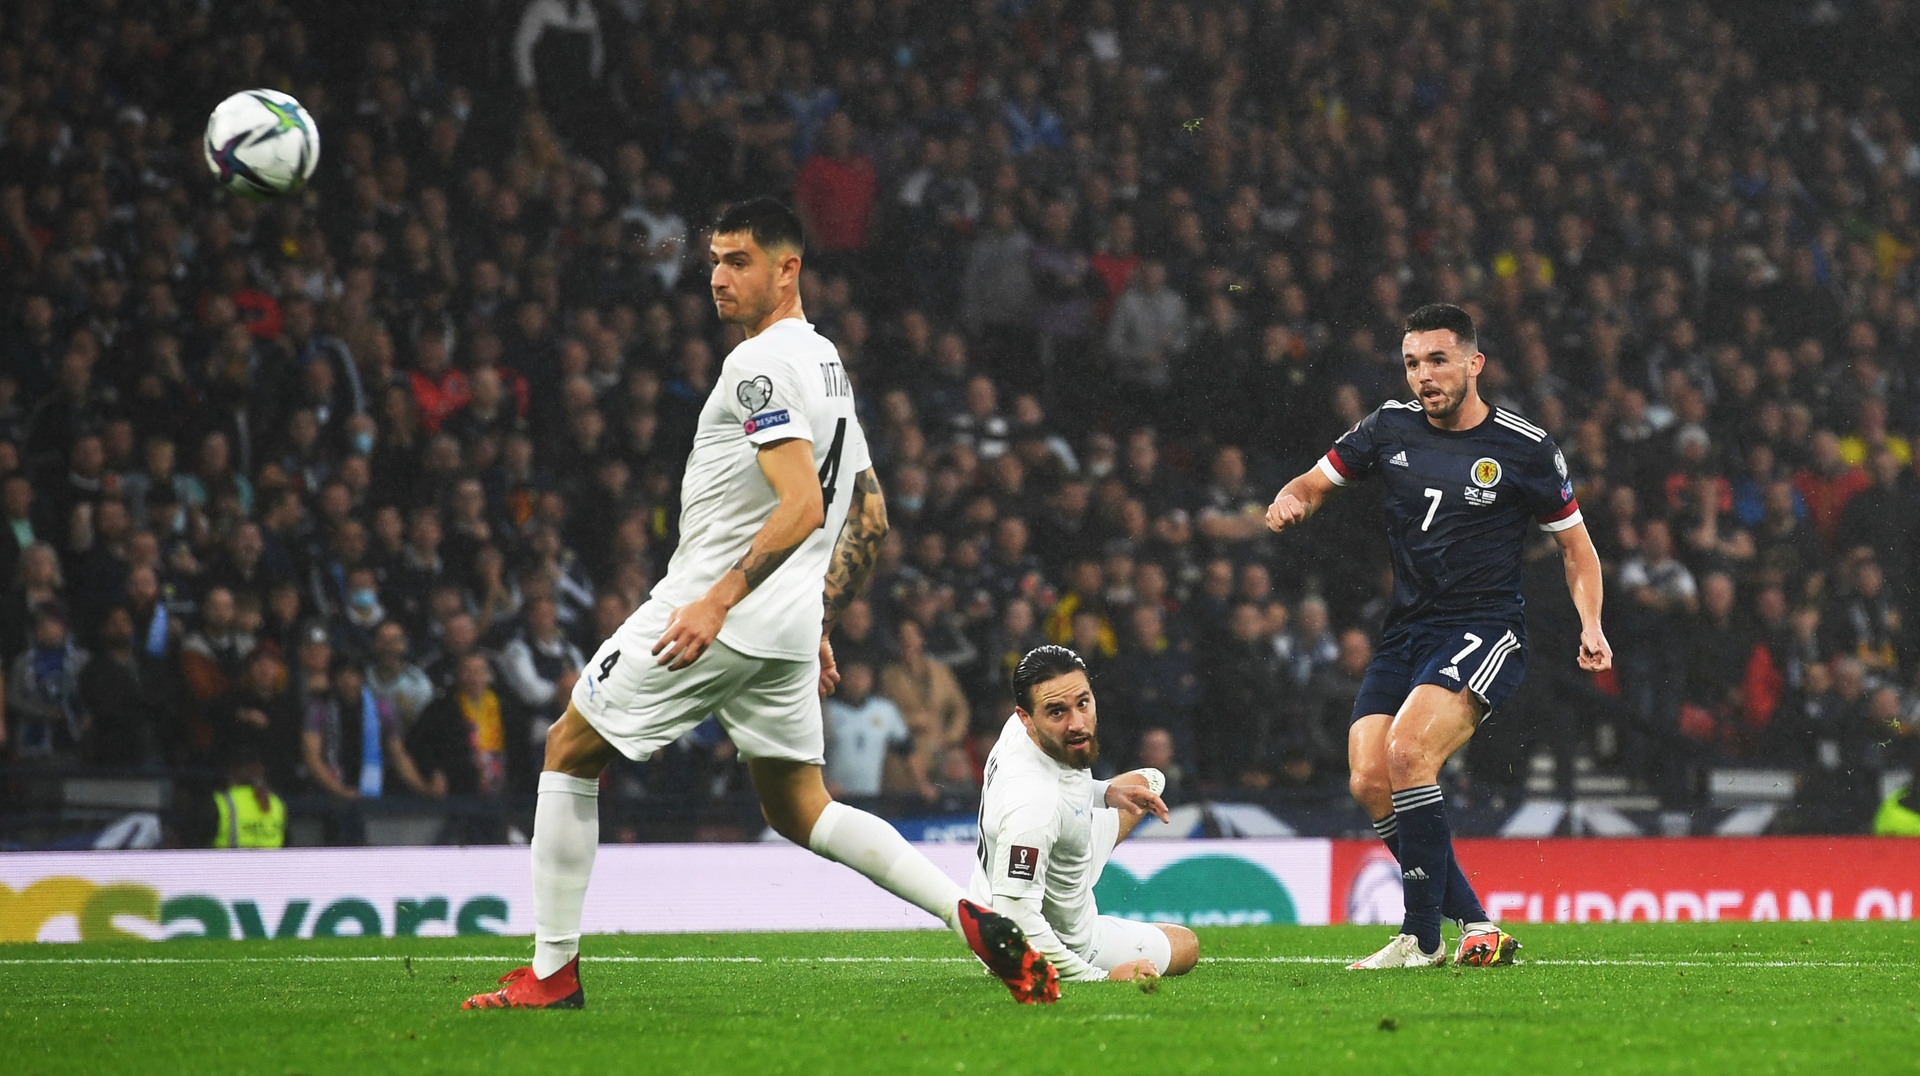 <strong>One of the greatest Hampden moments in recent times as Scott McTominay bundled home a winner in the 94th minute to send the Tartan Army wild and leave Scotland on the brink of the play-offs.</strong>”/><cite class=cite>SNS Group</cite></div><figcaption aria-hidden=true><strong>One of the greatest Hampden moments in recent times as Scott McTominay bundled home a winner in the 94th minute to send the Tartan Army wild and leave Scotland on the brink of the play-offs.</strong> <cite class=hidden>SNS Group</cite></figcaption></figure><h2 class=